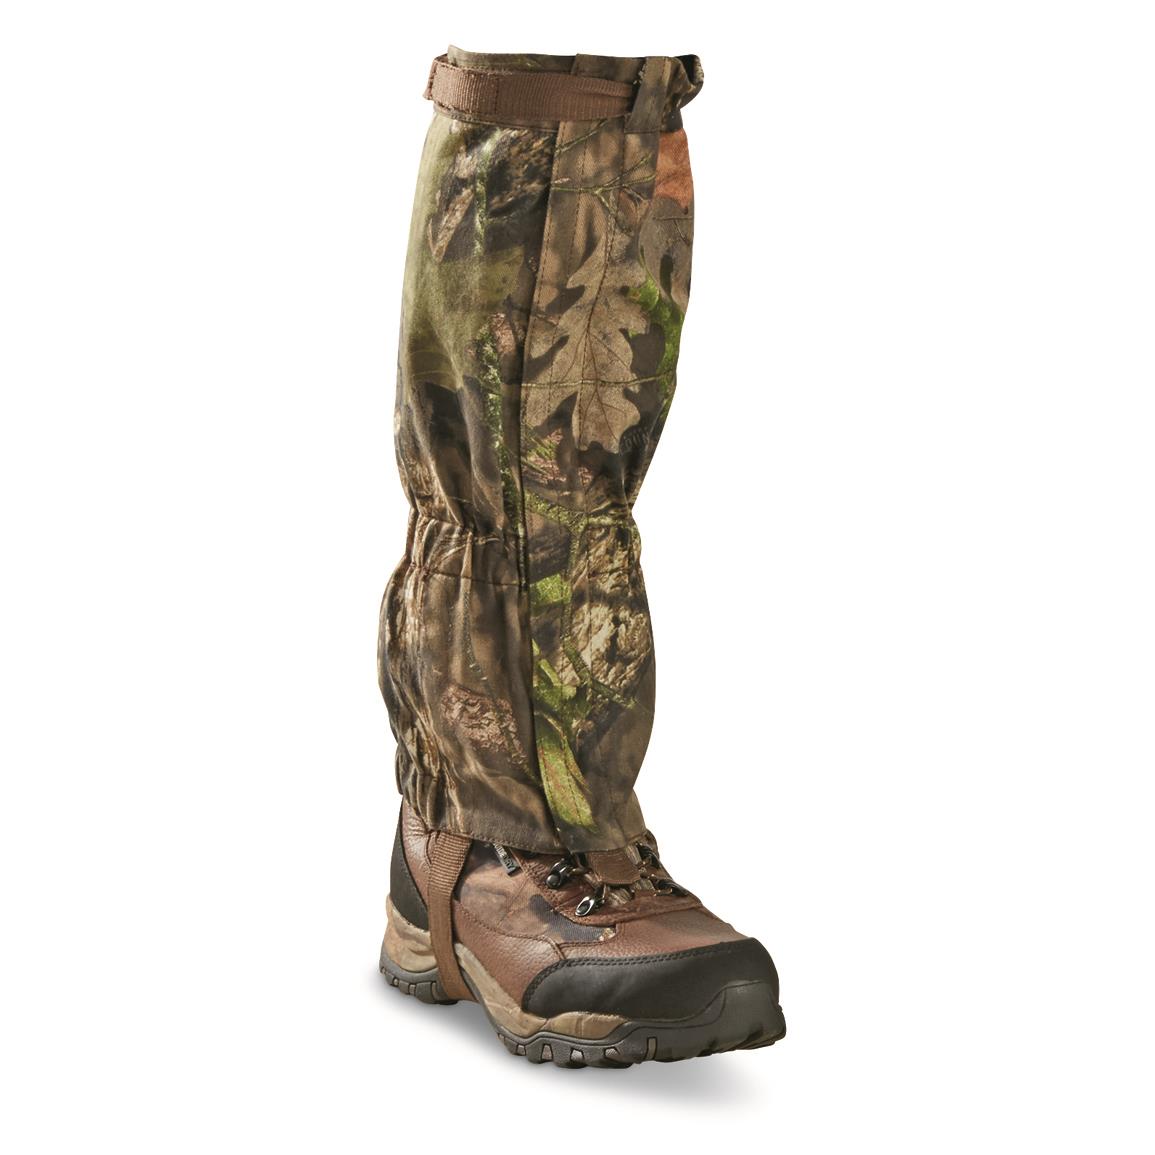 Water-resistant cotton construction, Mossy Oak Break-Up® COUNTRY™